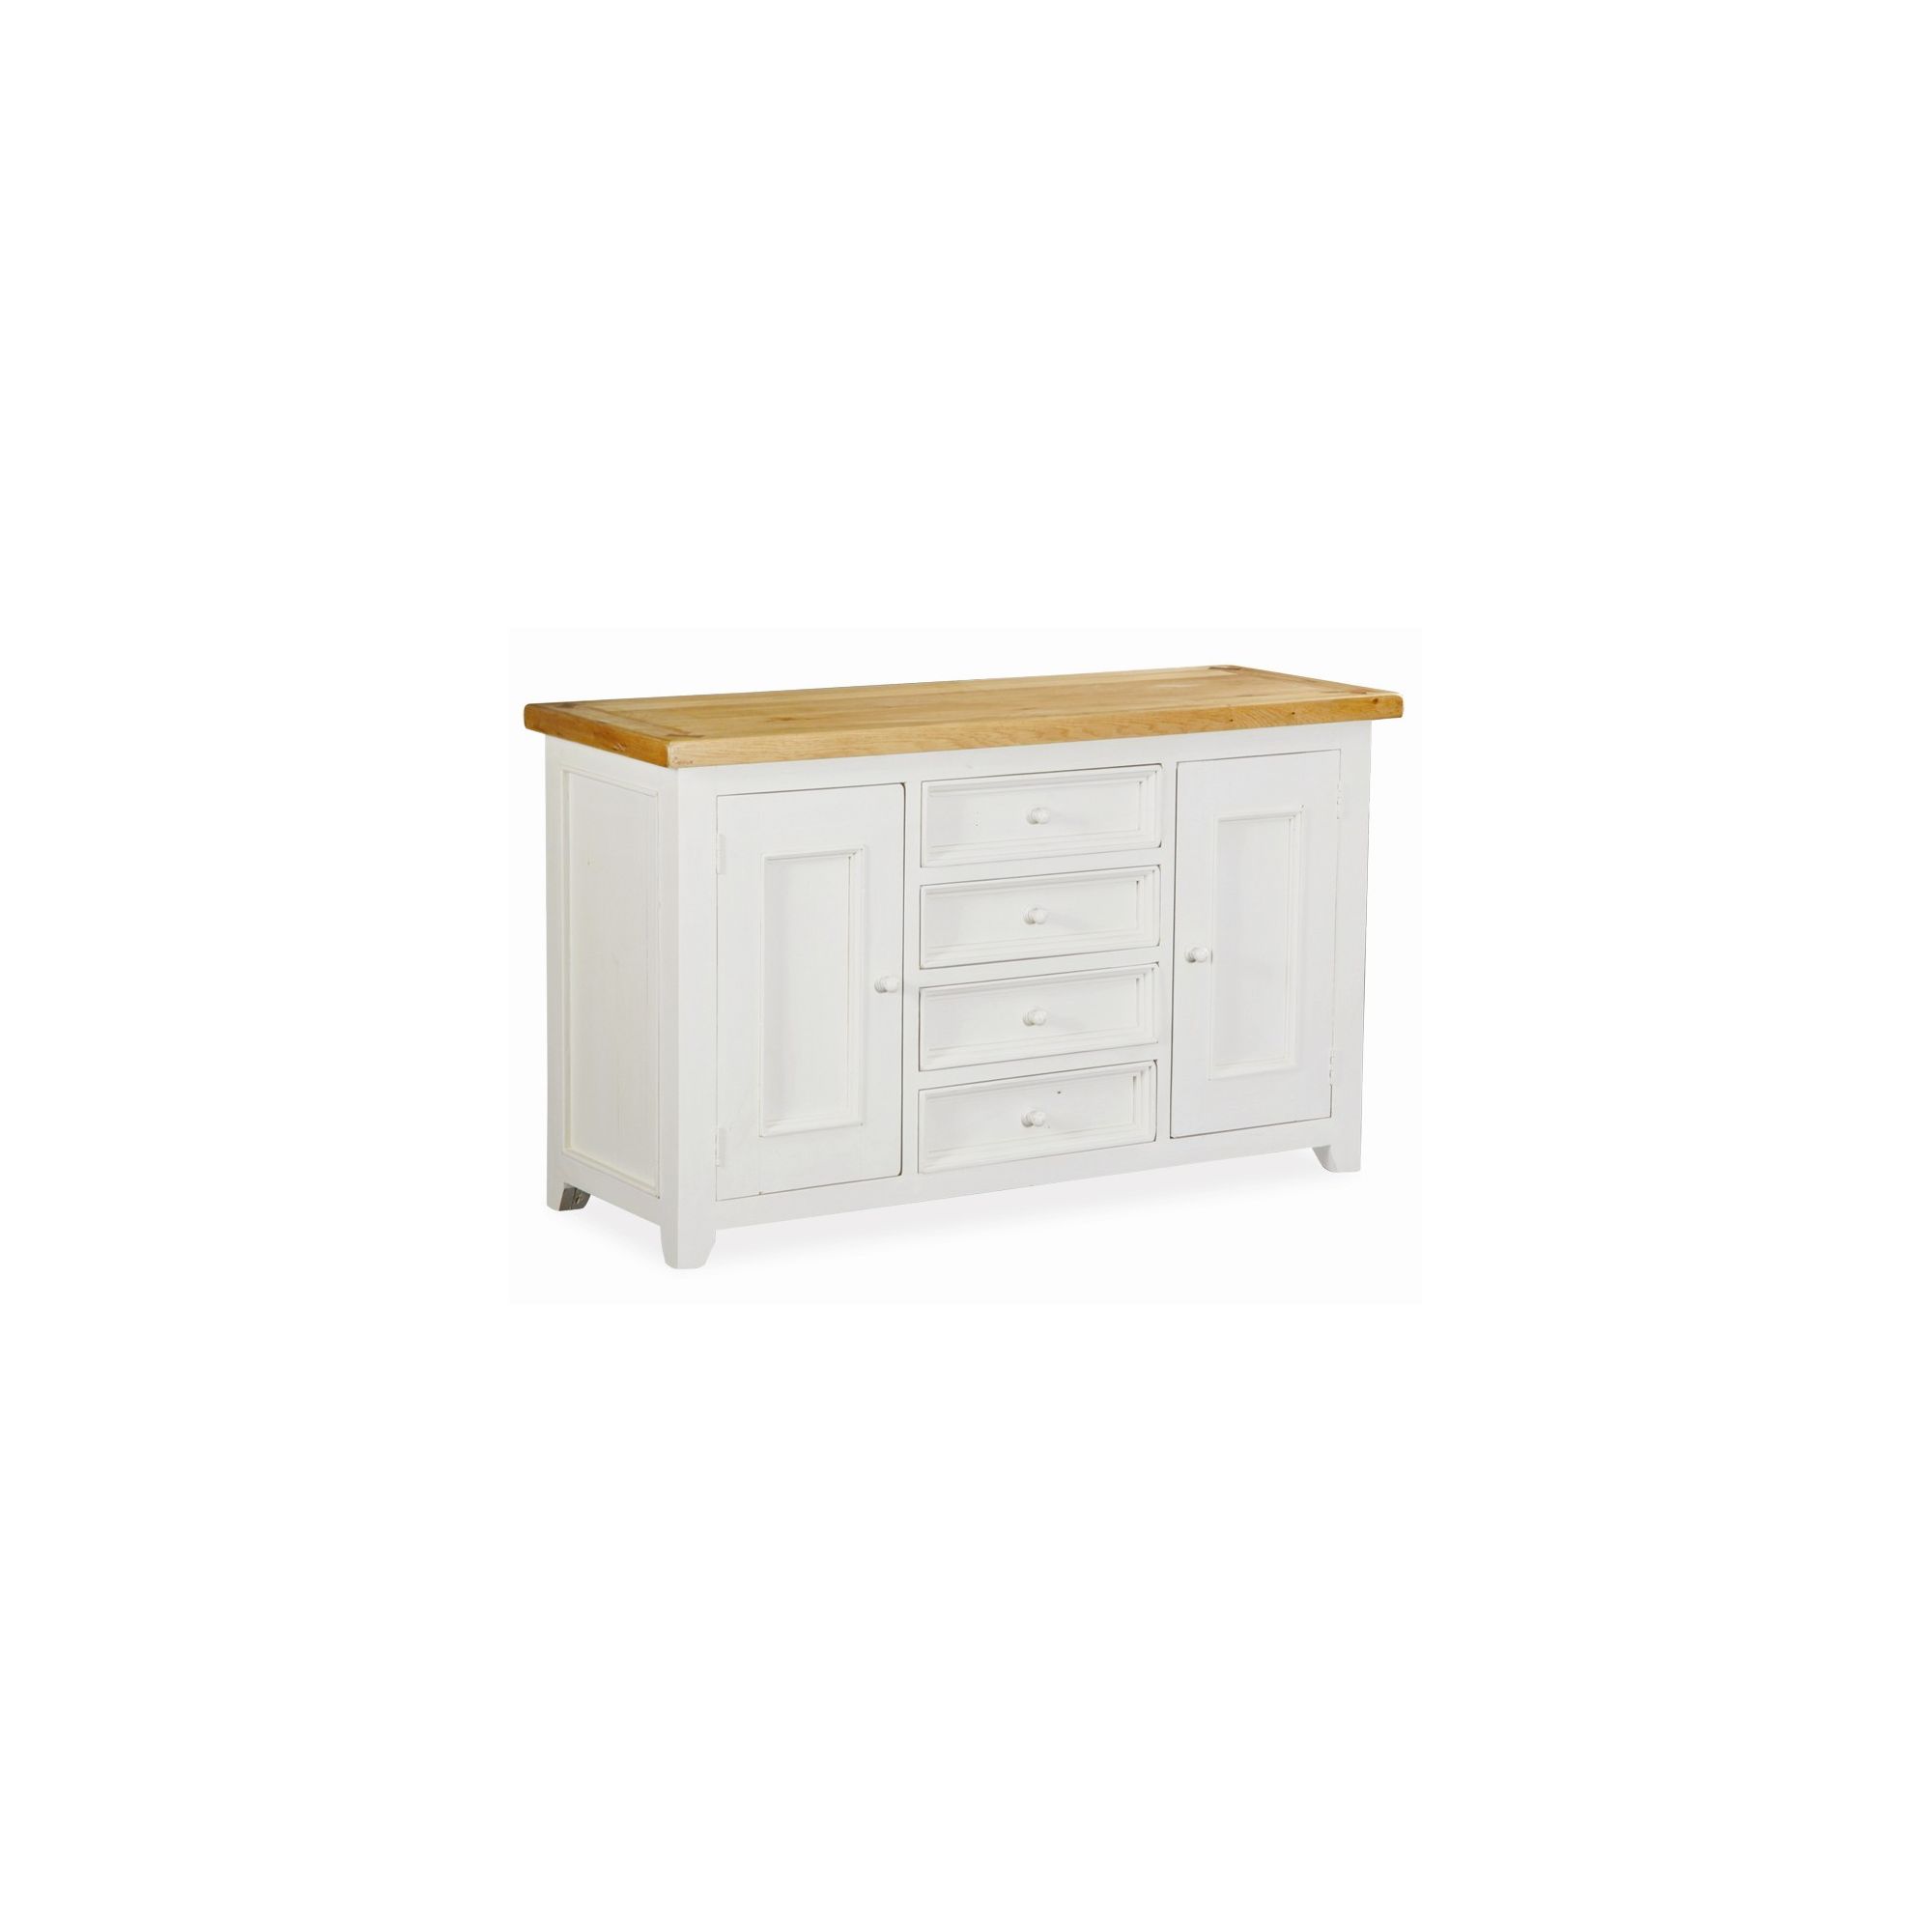 Alterton Furniture Wiltshire Sideboard at Tesco Direct